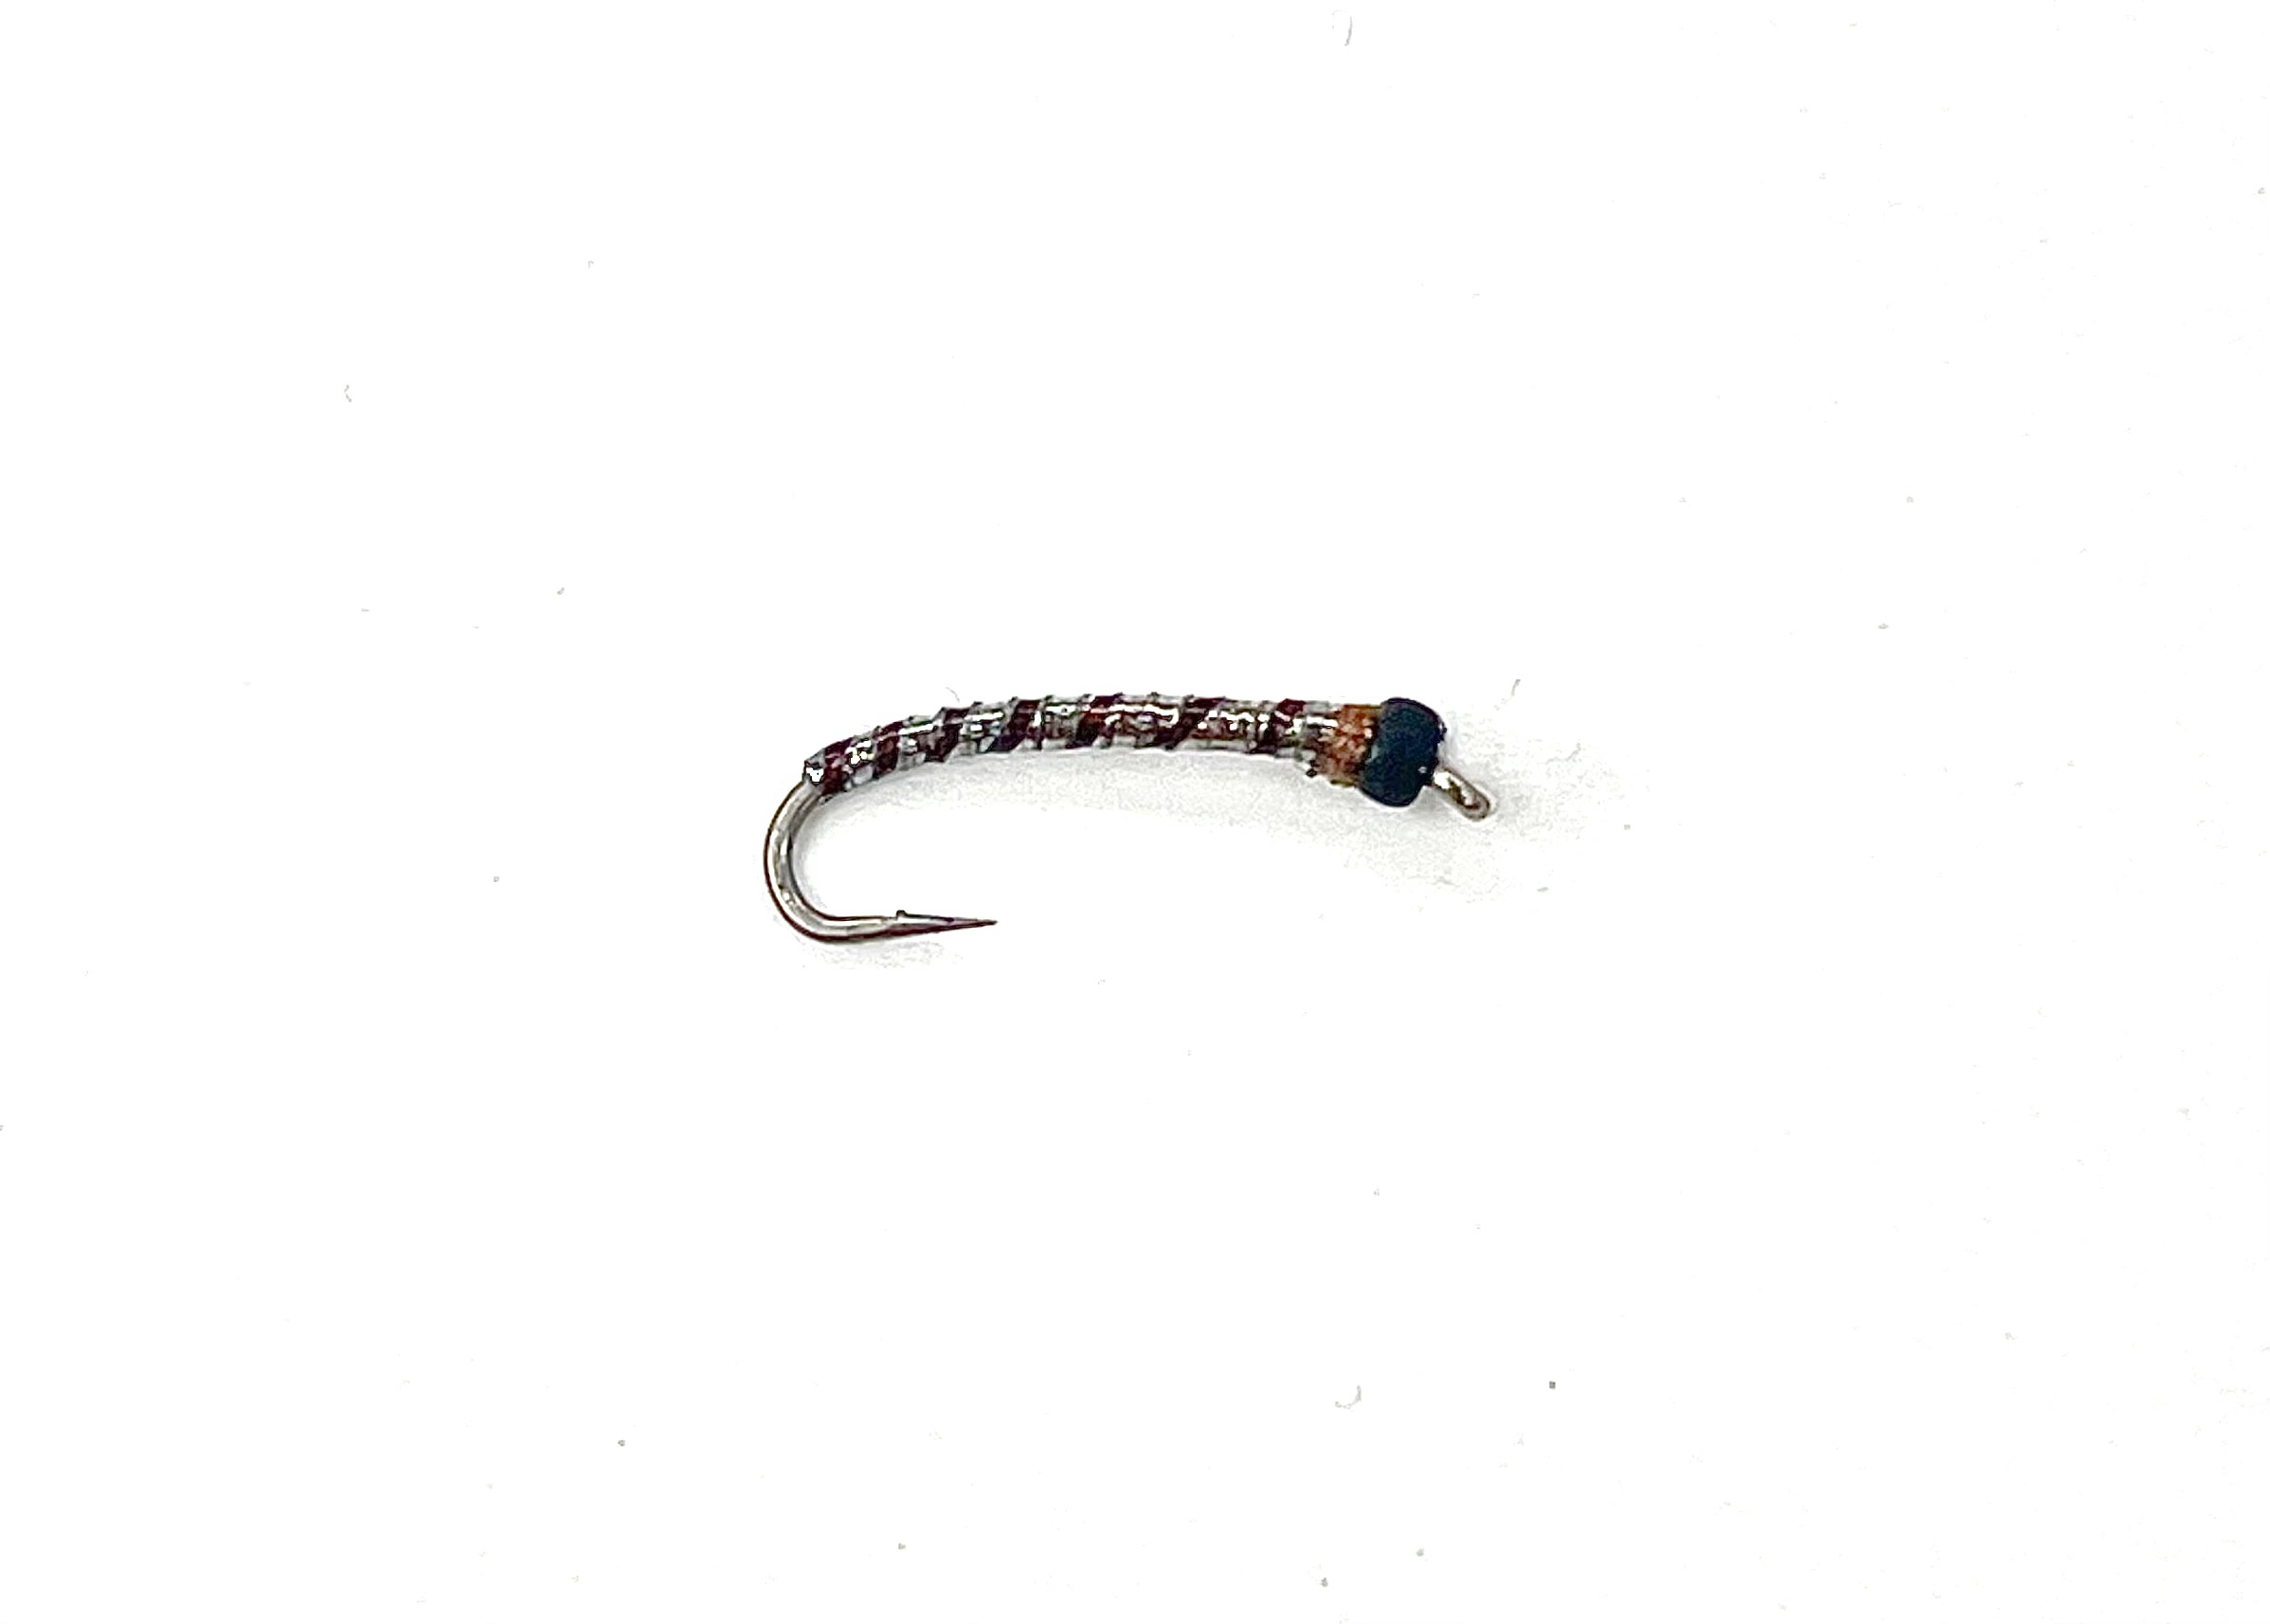 M&Y Cat's Holo Brown Rib ASB Chironomid - Size 14